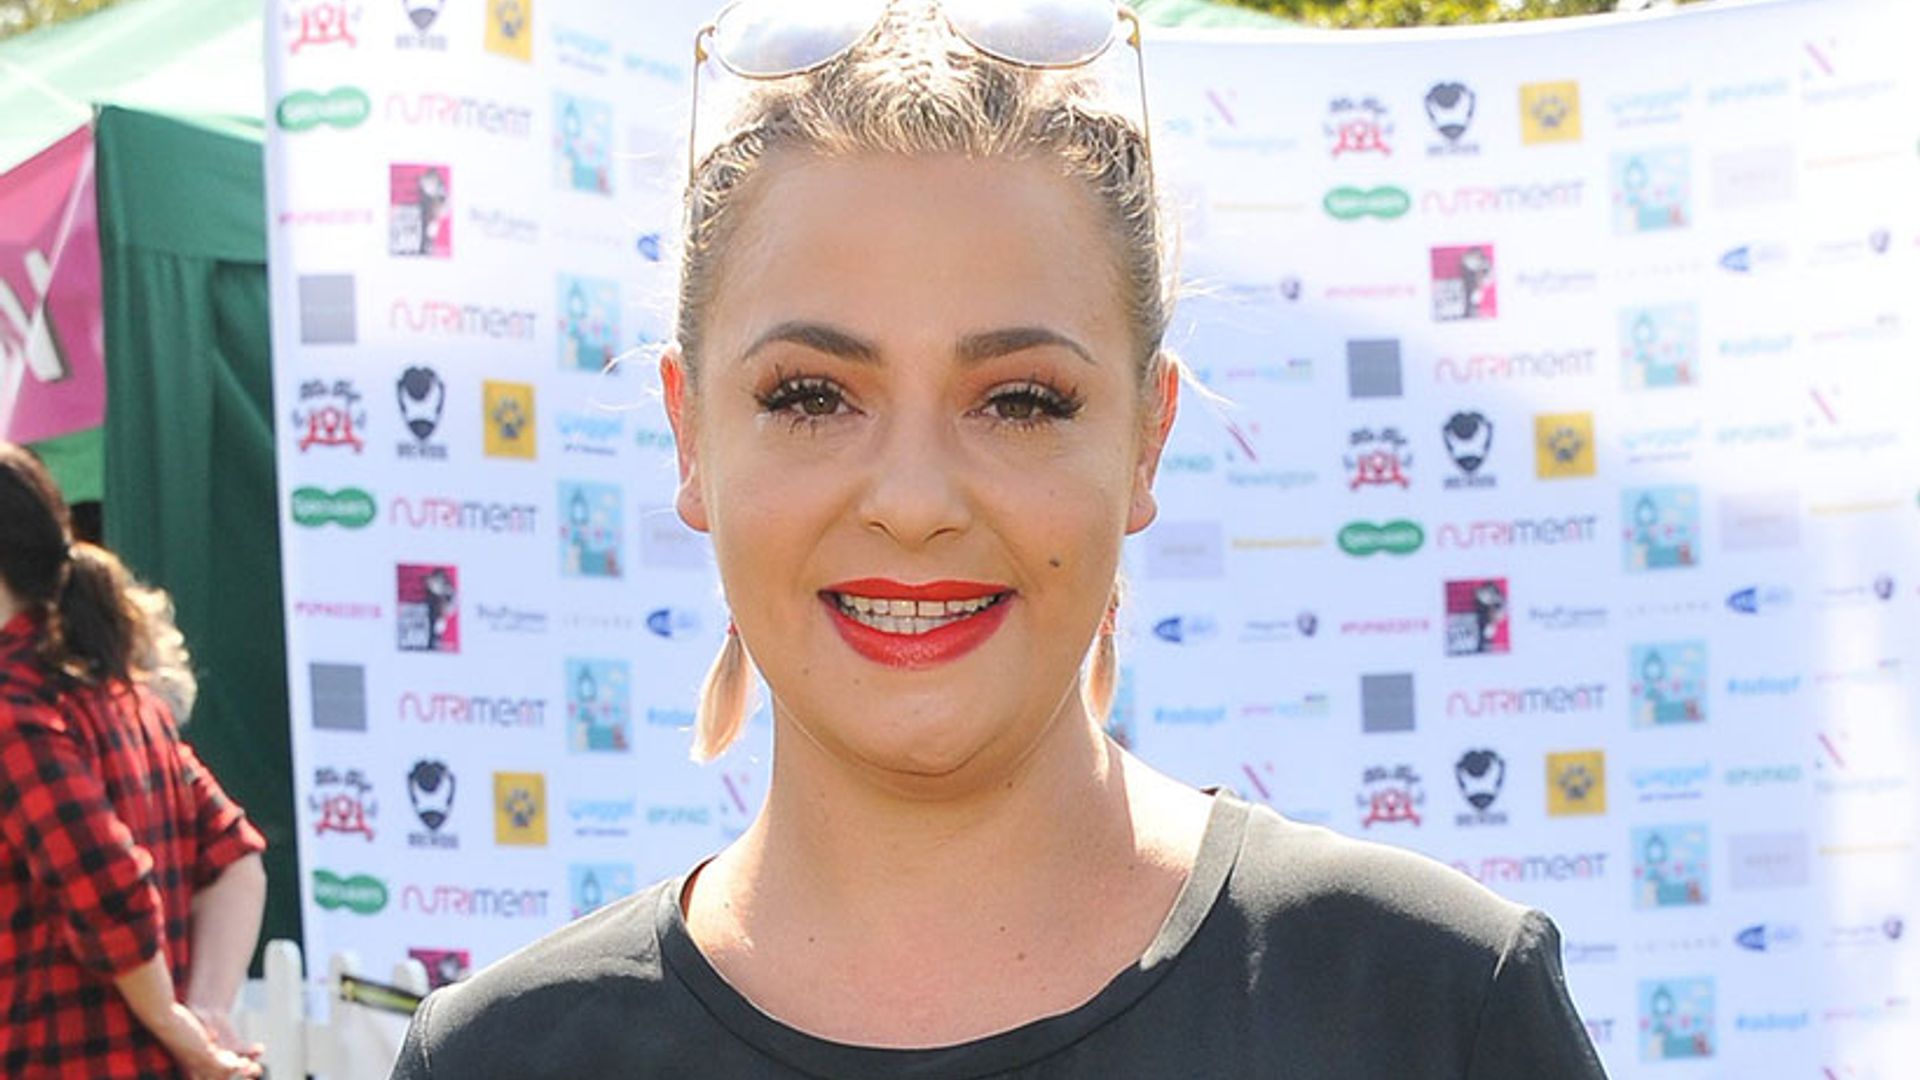 Ant Mcpartlins Ex Wife Lisa Armstrong Responds To Claims Shes Wearing